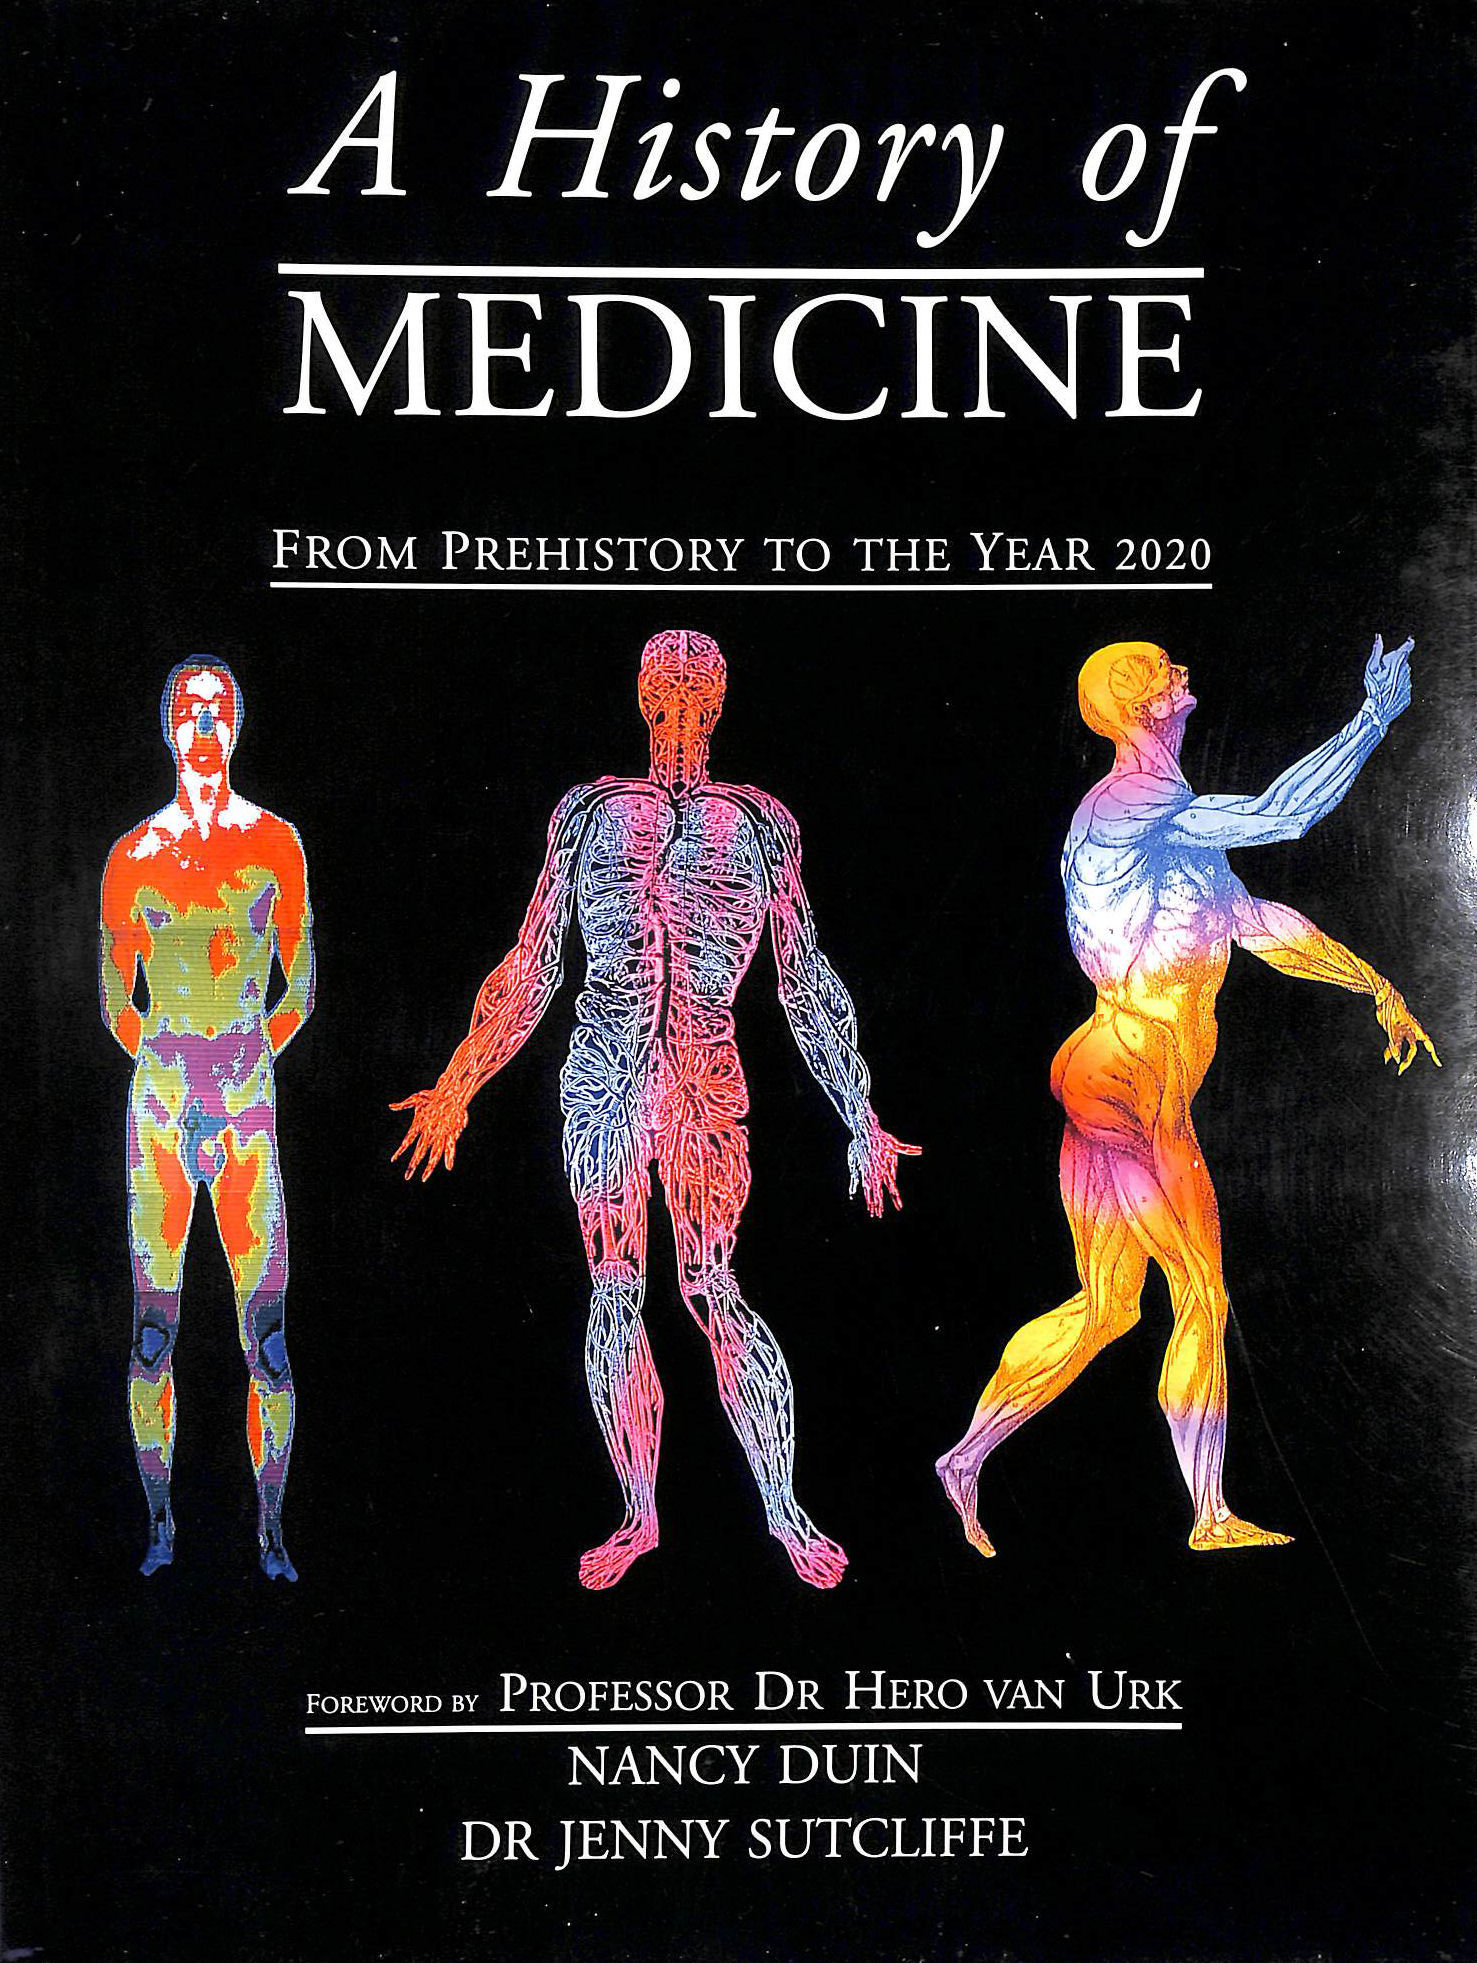 SUTCLIFFE, JENNY; DUIN, NANCY - A History of Medicine: From Pre-history to the Year 2020